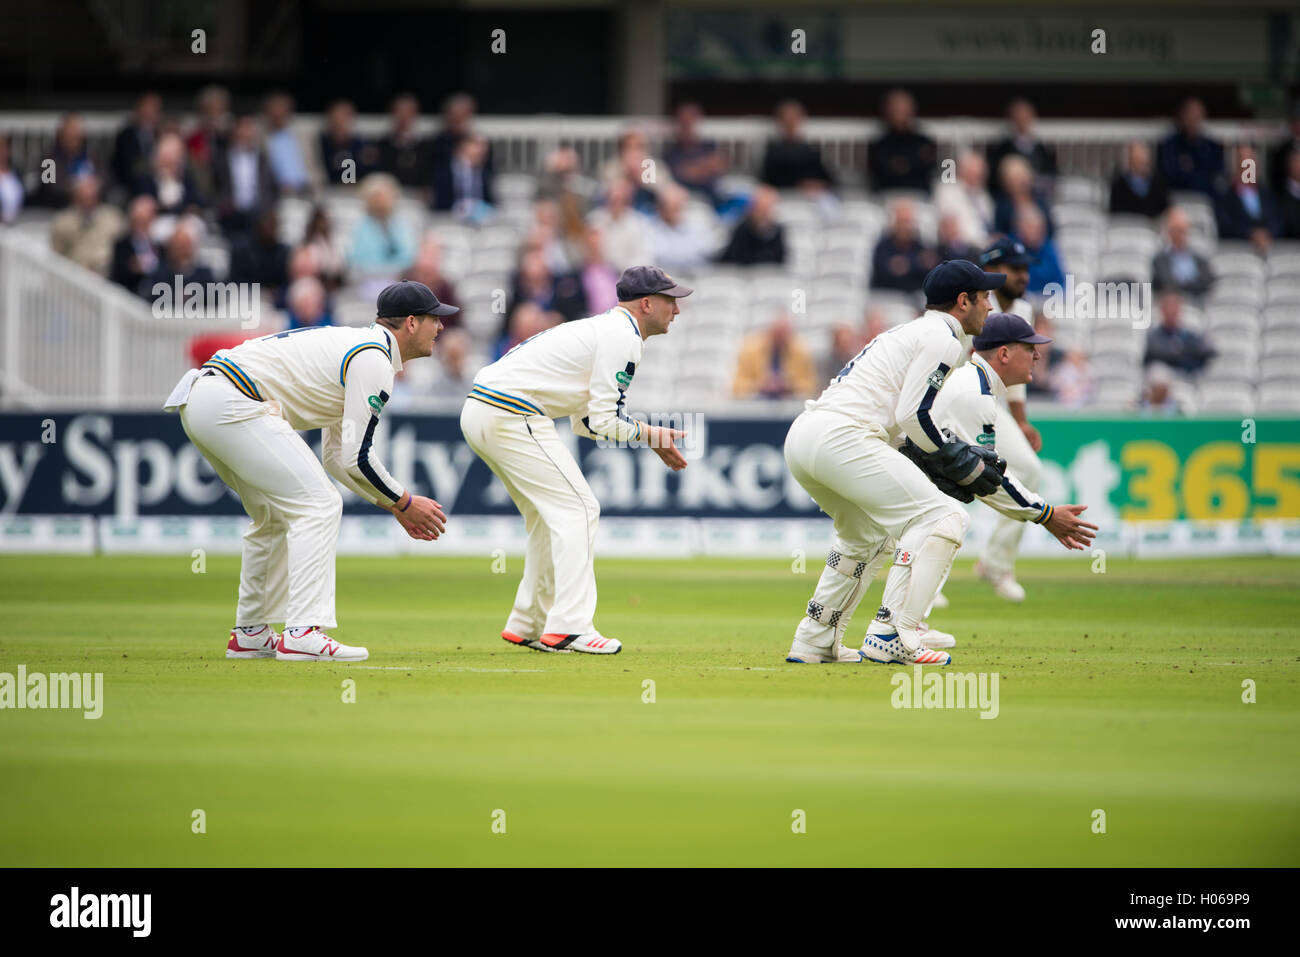 London, UK. 20th Sep, 2016. Andrew Hodd, Alex Lees, Adam Lyth and Gary Ballance of Yorkshire watch the ball during day one of the Specsavers County Championship Division One match between Middlesex and Yorkshire at Lords on September 20, 2016 in London, England. Credit:  Michael Jamison/Alamy Live News Stock Photo